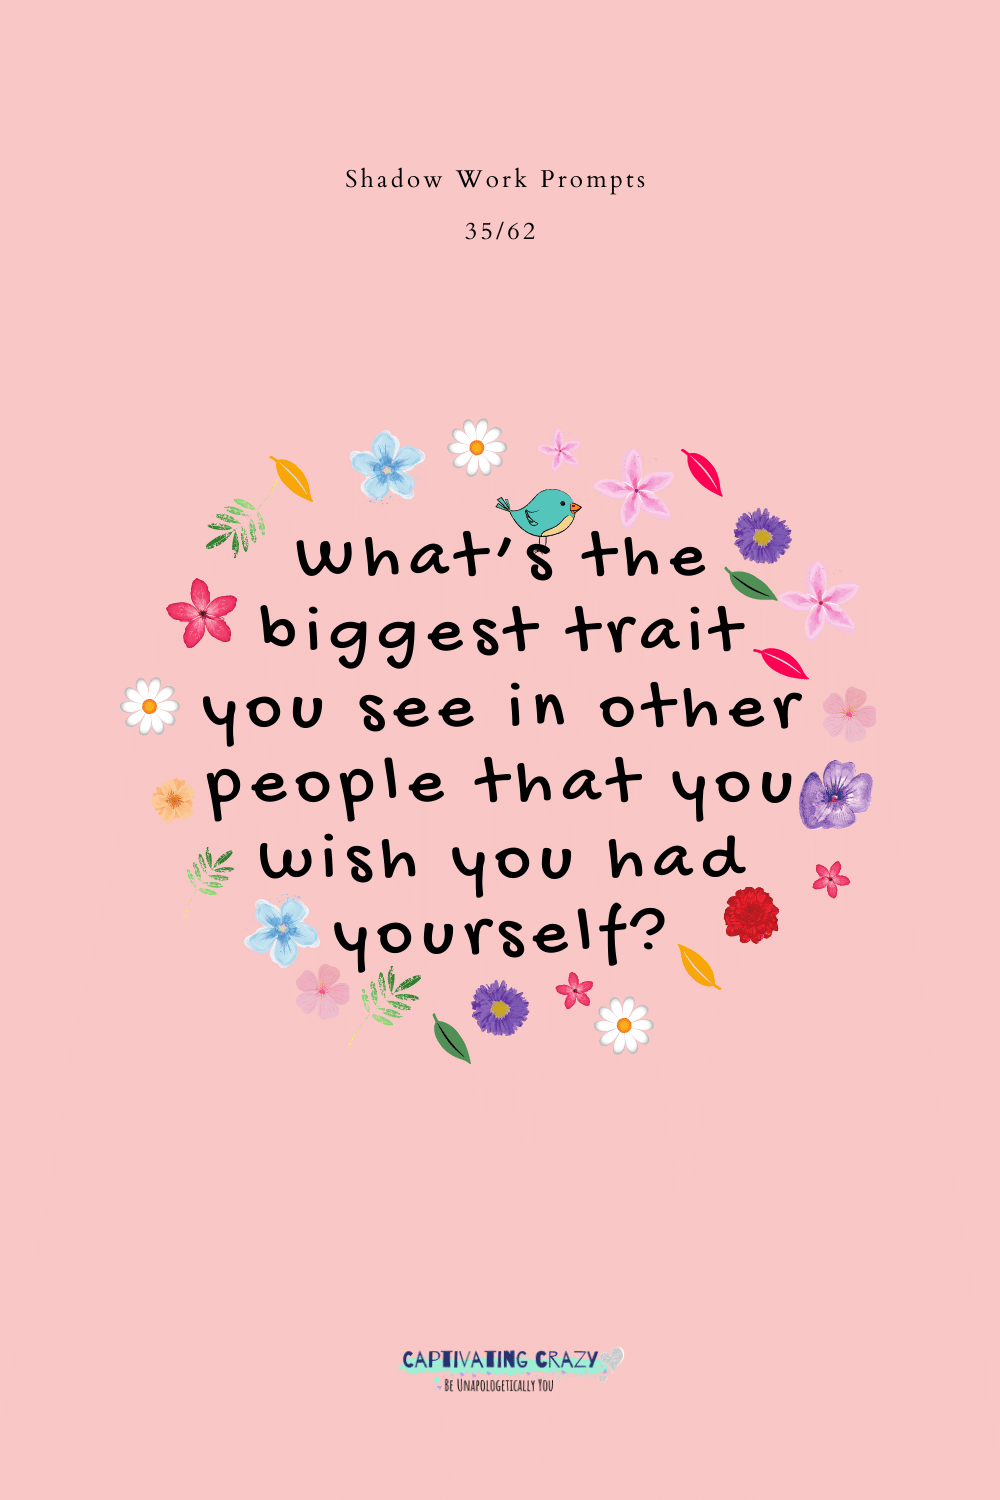 What's the biggest trait you see in other people that you wish you had yourself?